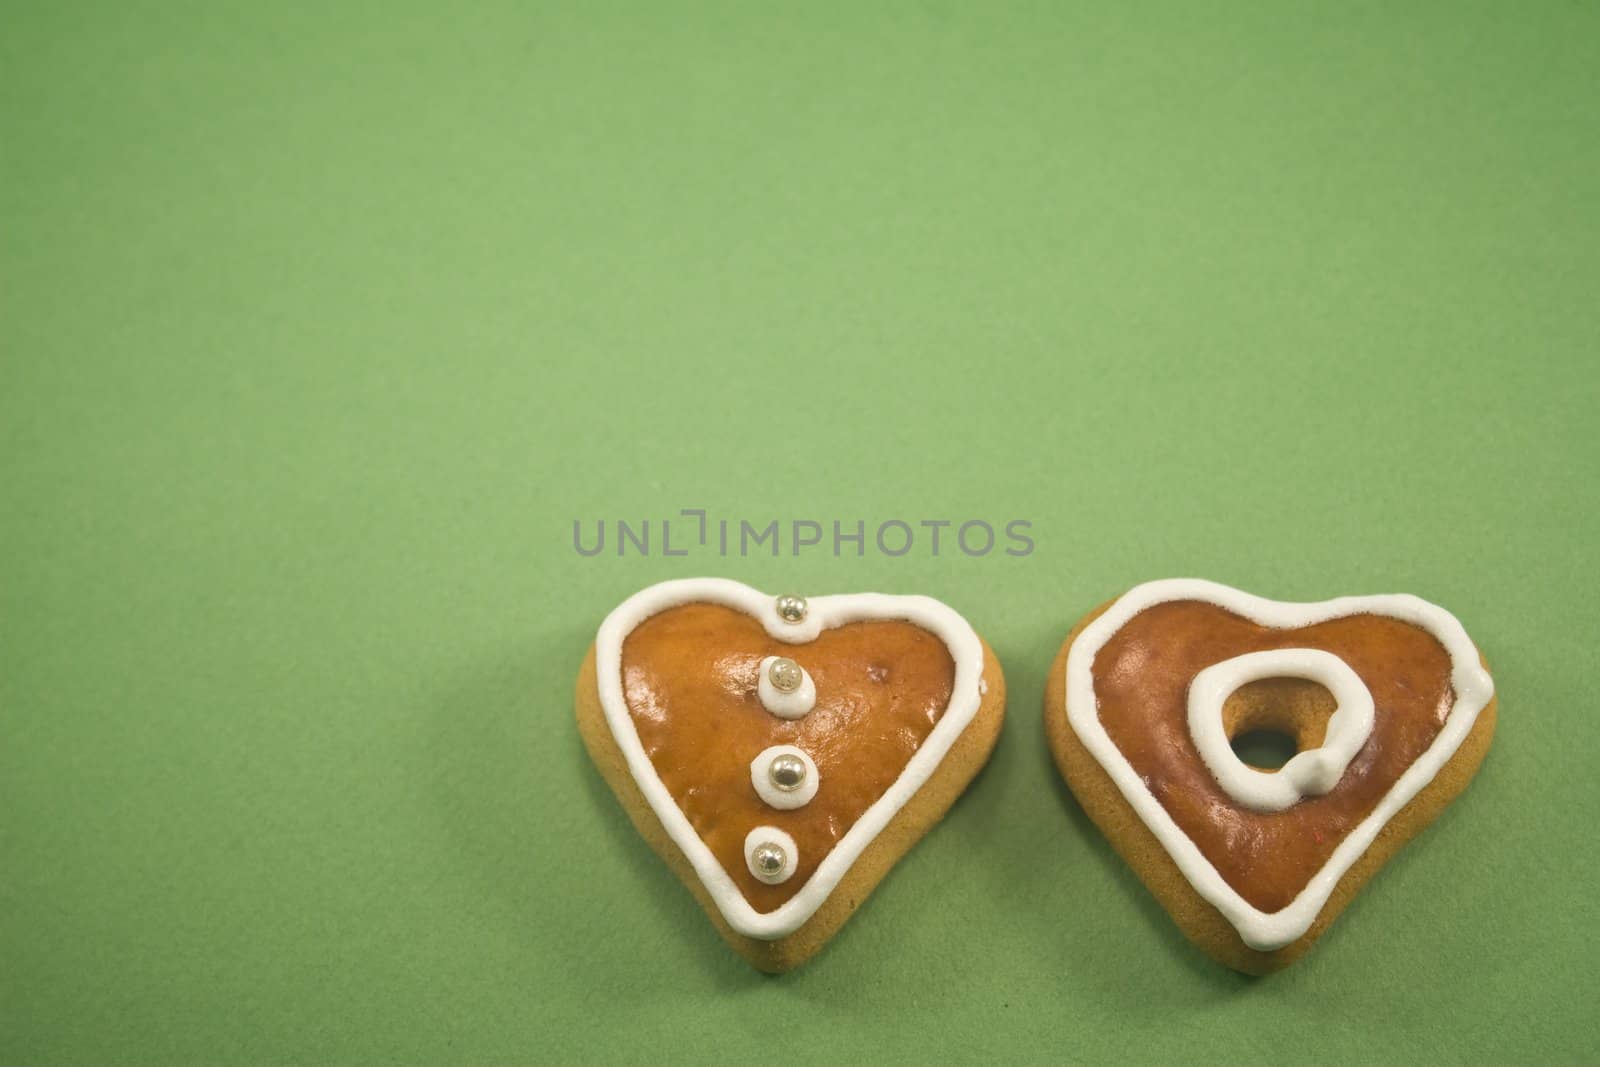 Two Christmas cookies against green background ad space above